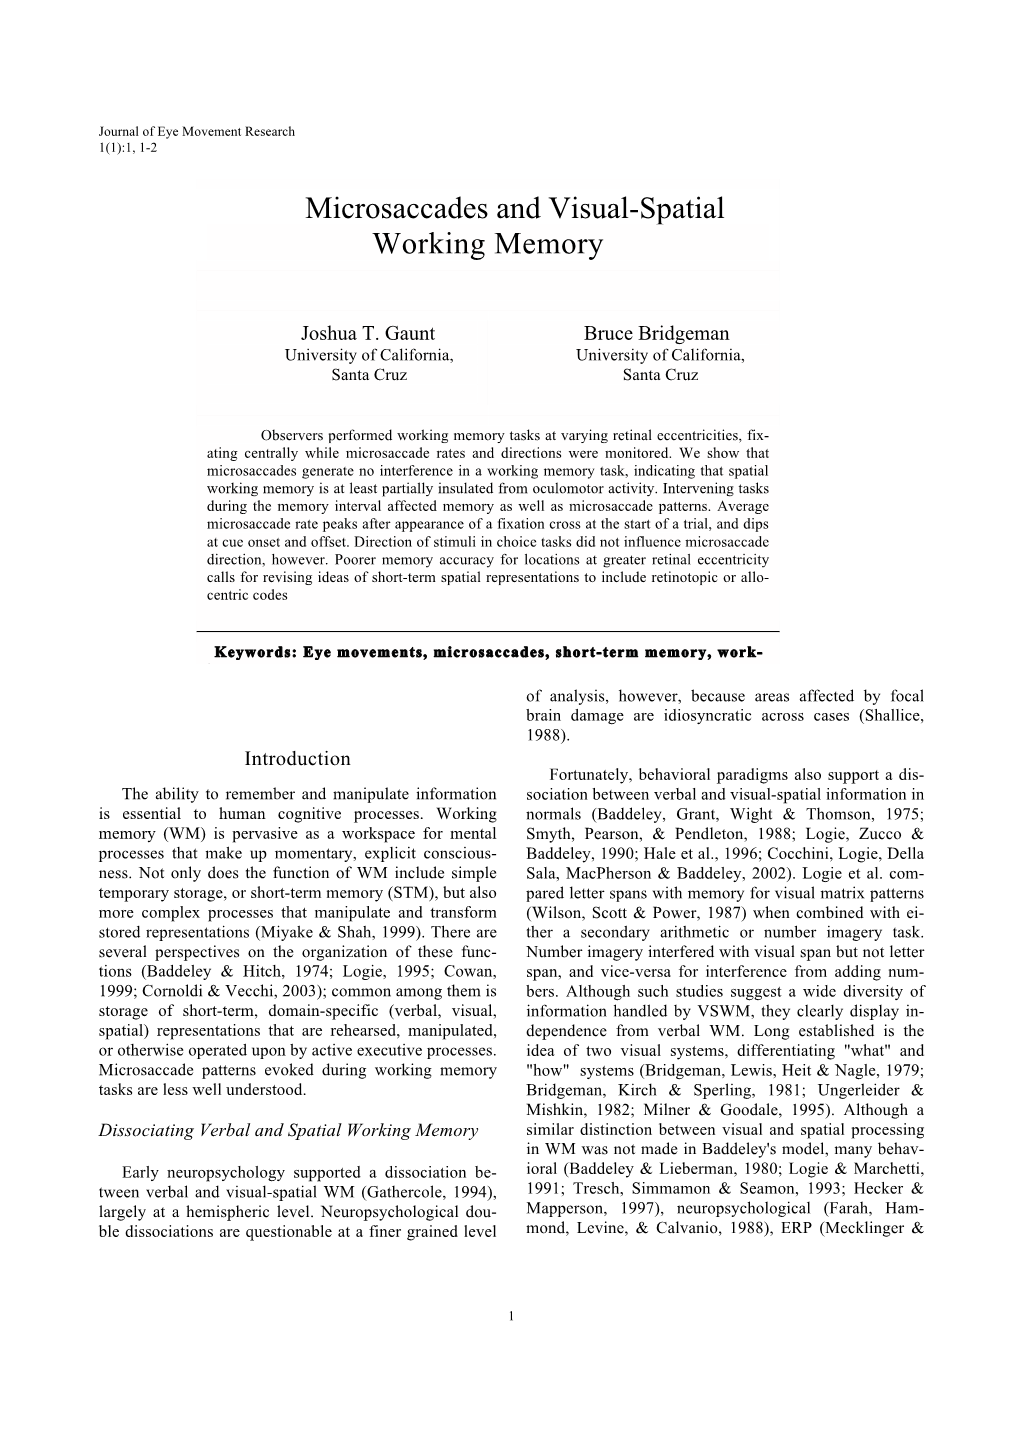 Microsaccades and Visual-Spatial Working Memory